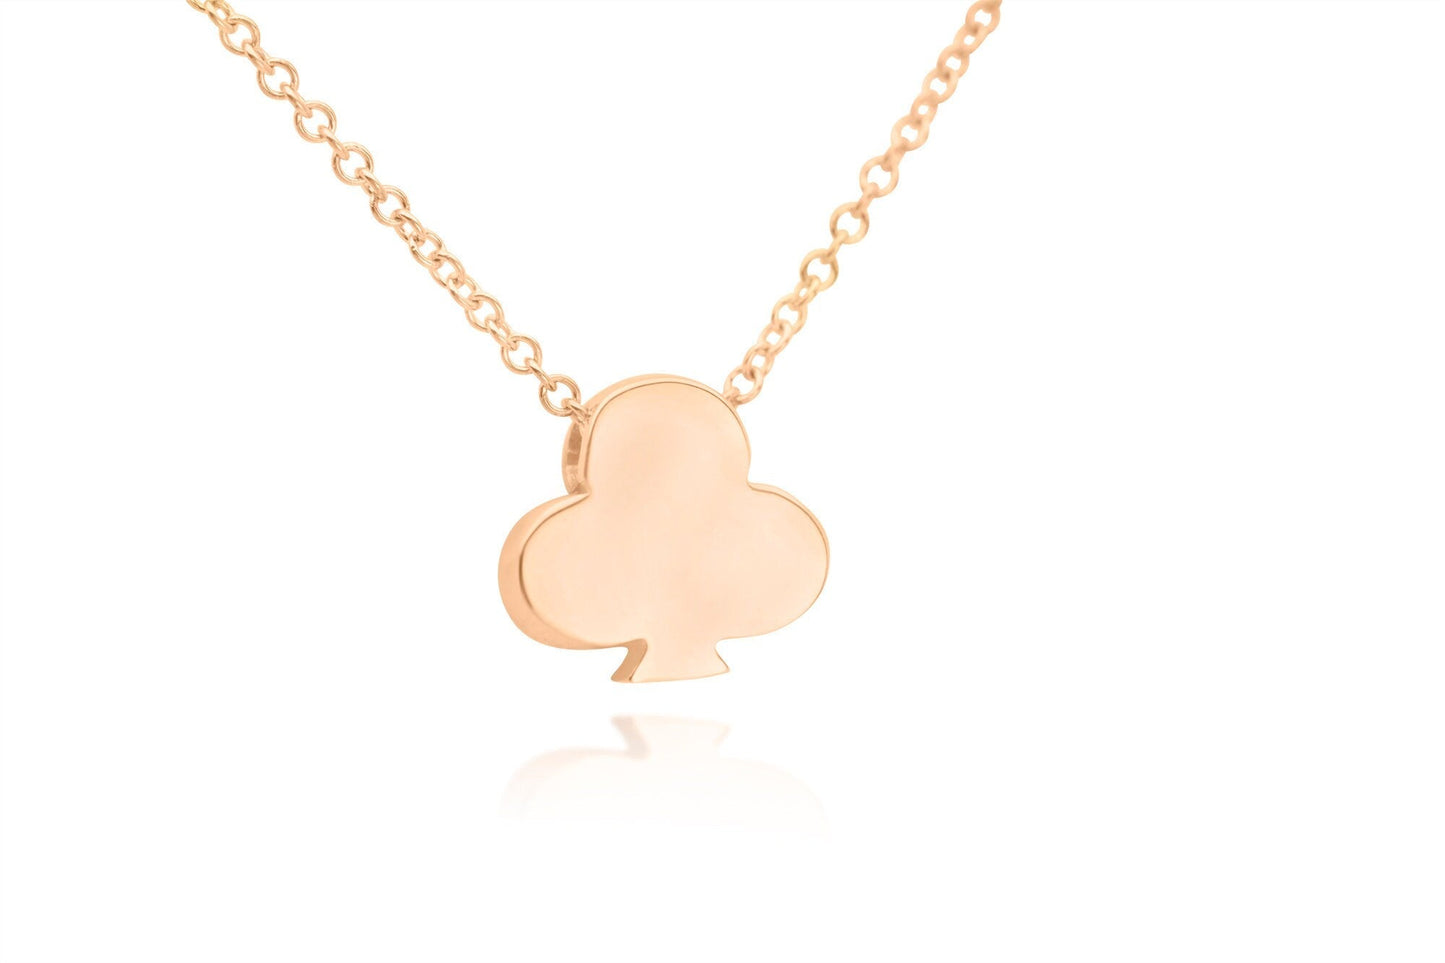 14k Solid gold Floating Clover Necklace, Poker Club Charm Pendant